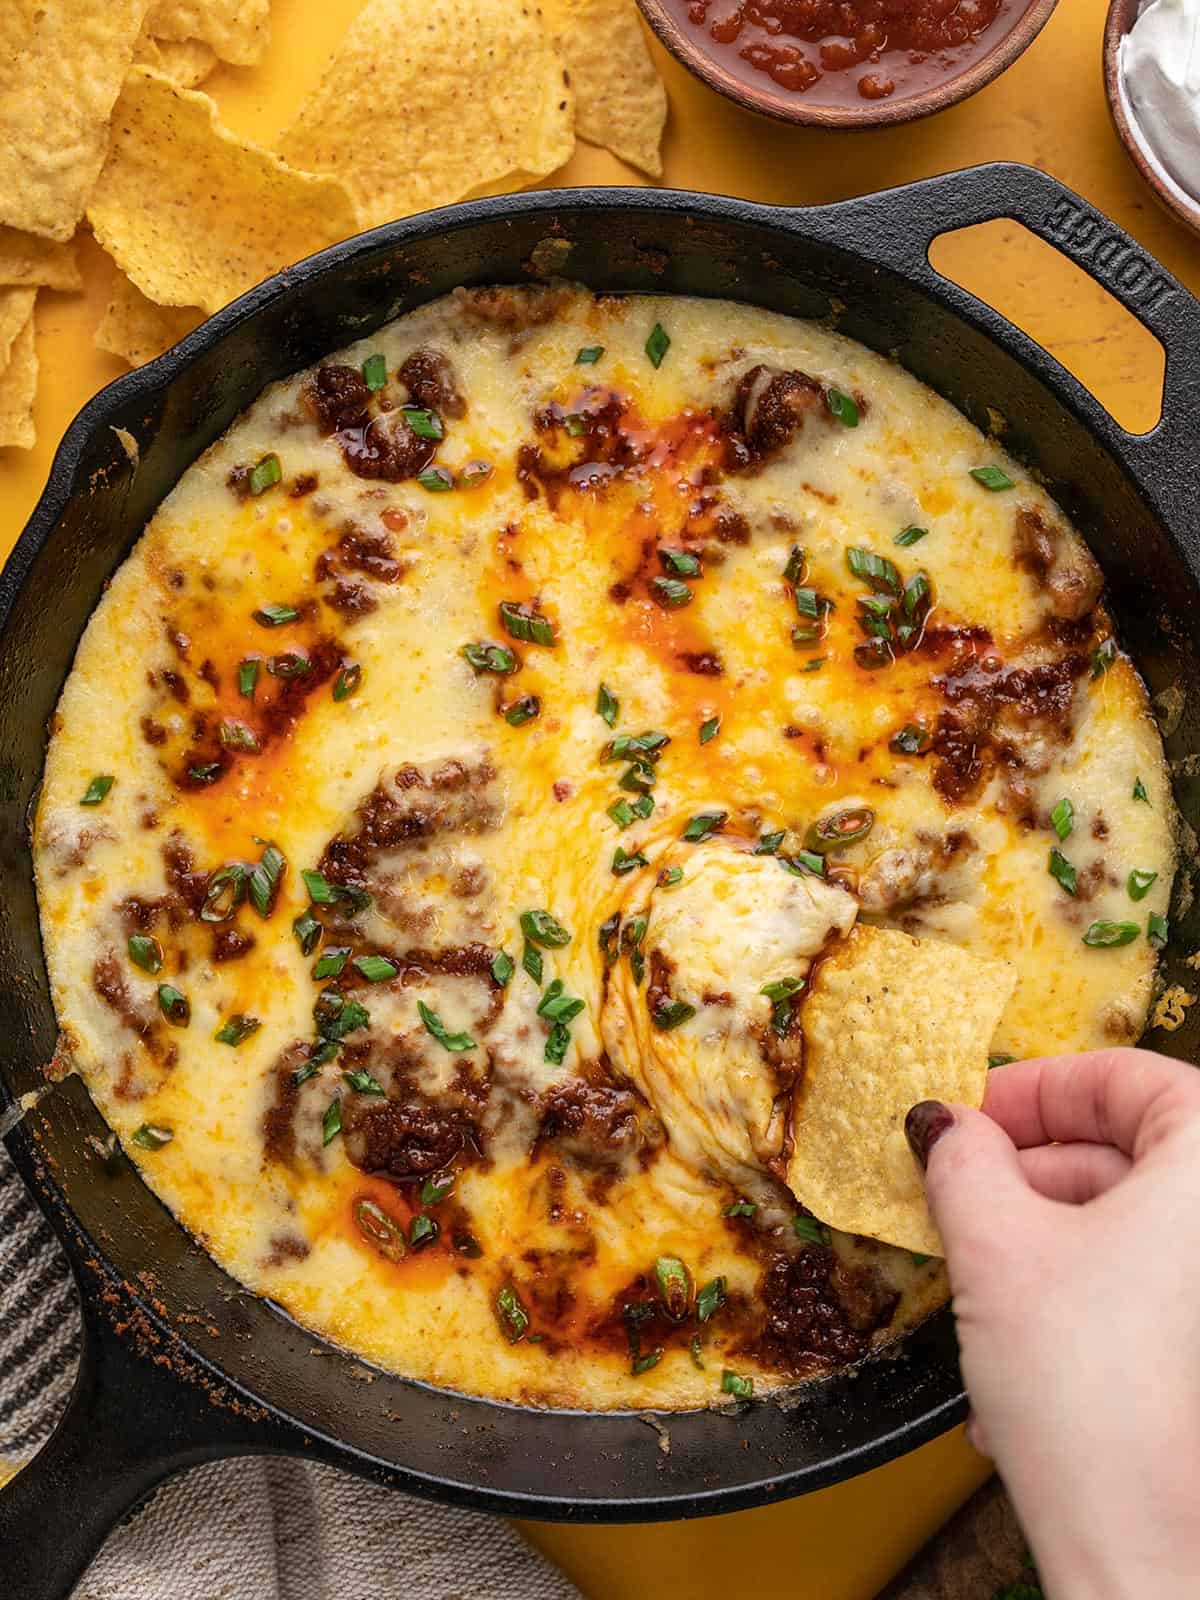 Overhead shot of Queso Fundido in a cast iron pan  with a hand dipping a chip into it.